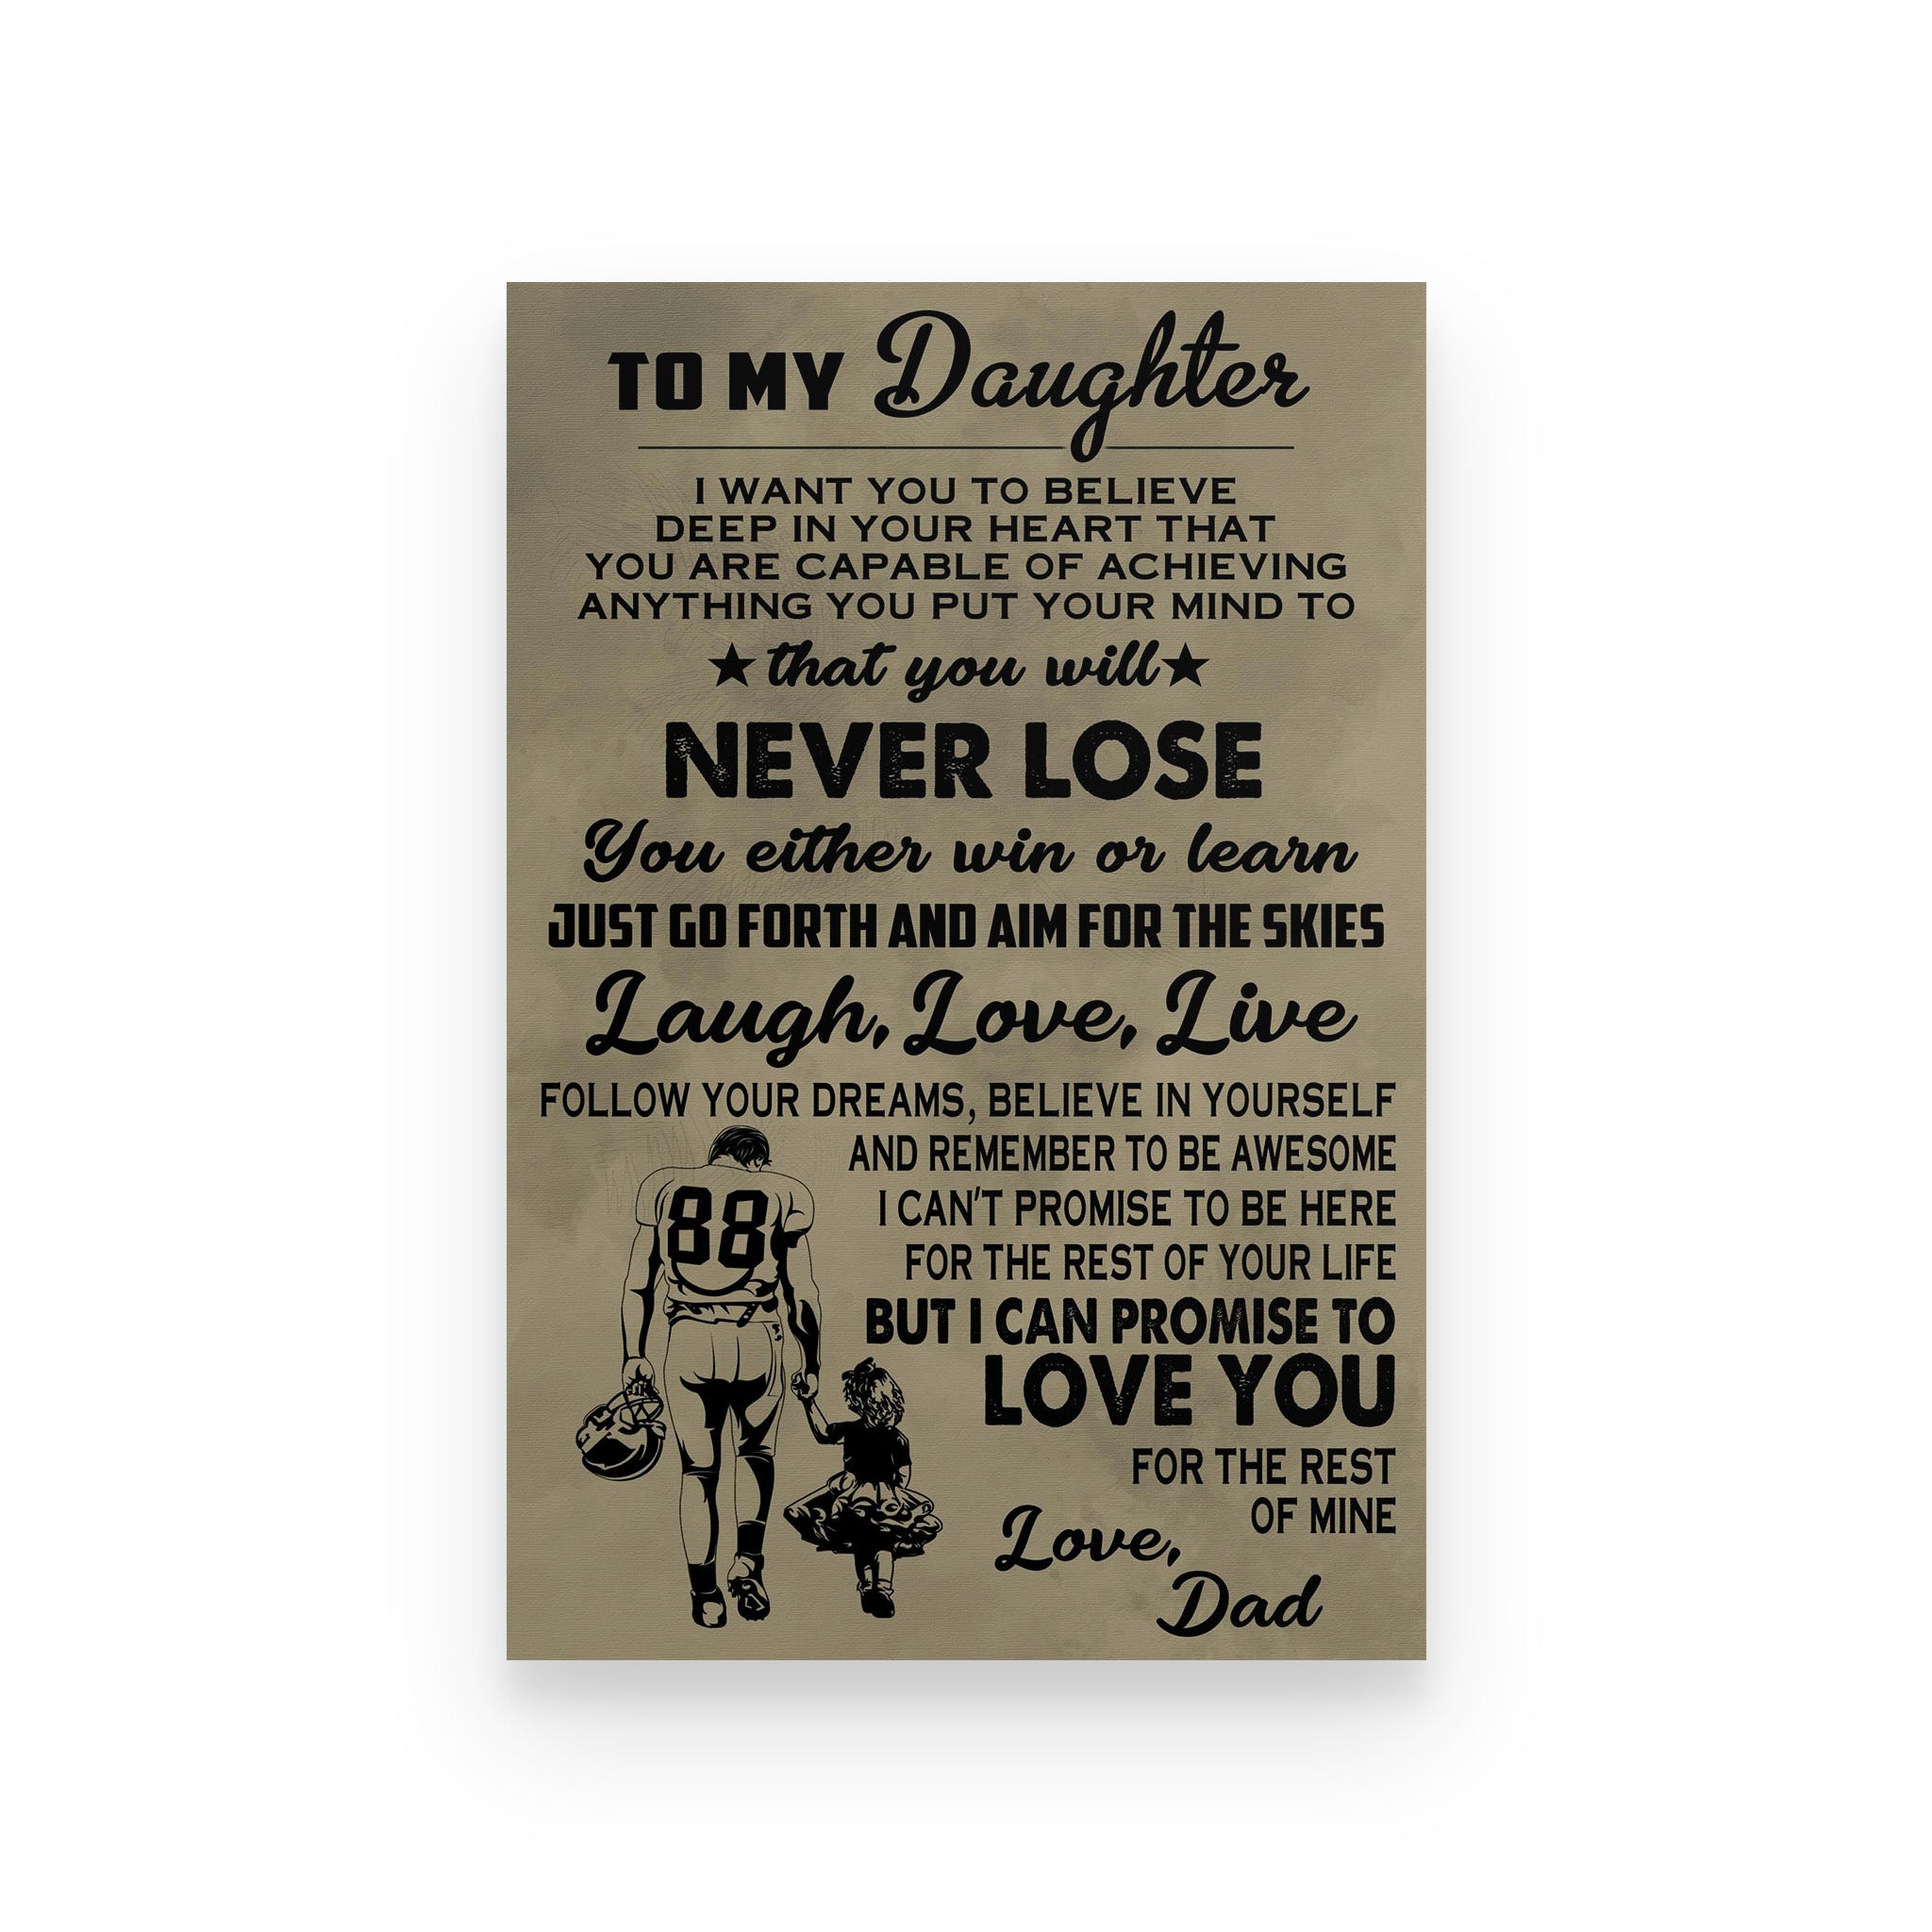 American football poster dad to daughter I want you to believe deep in your heart